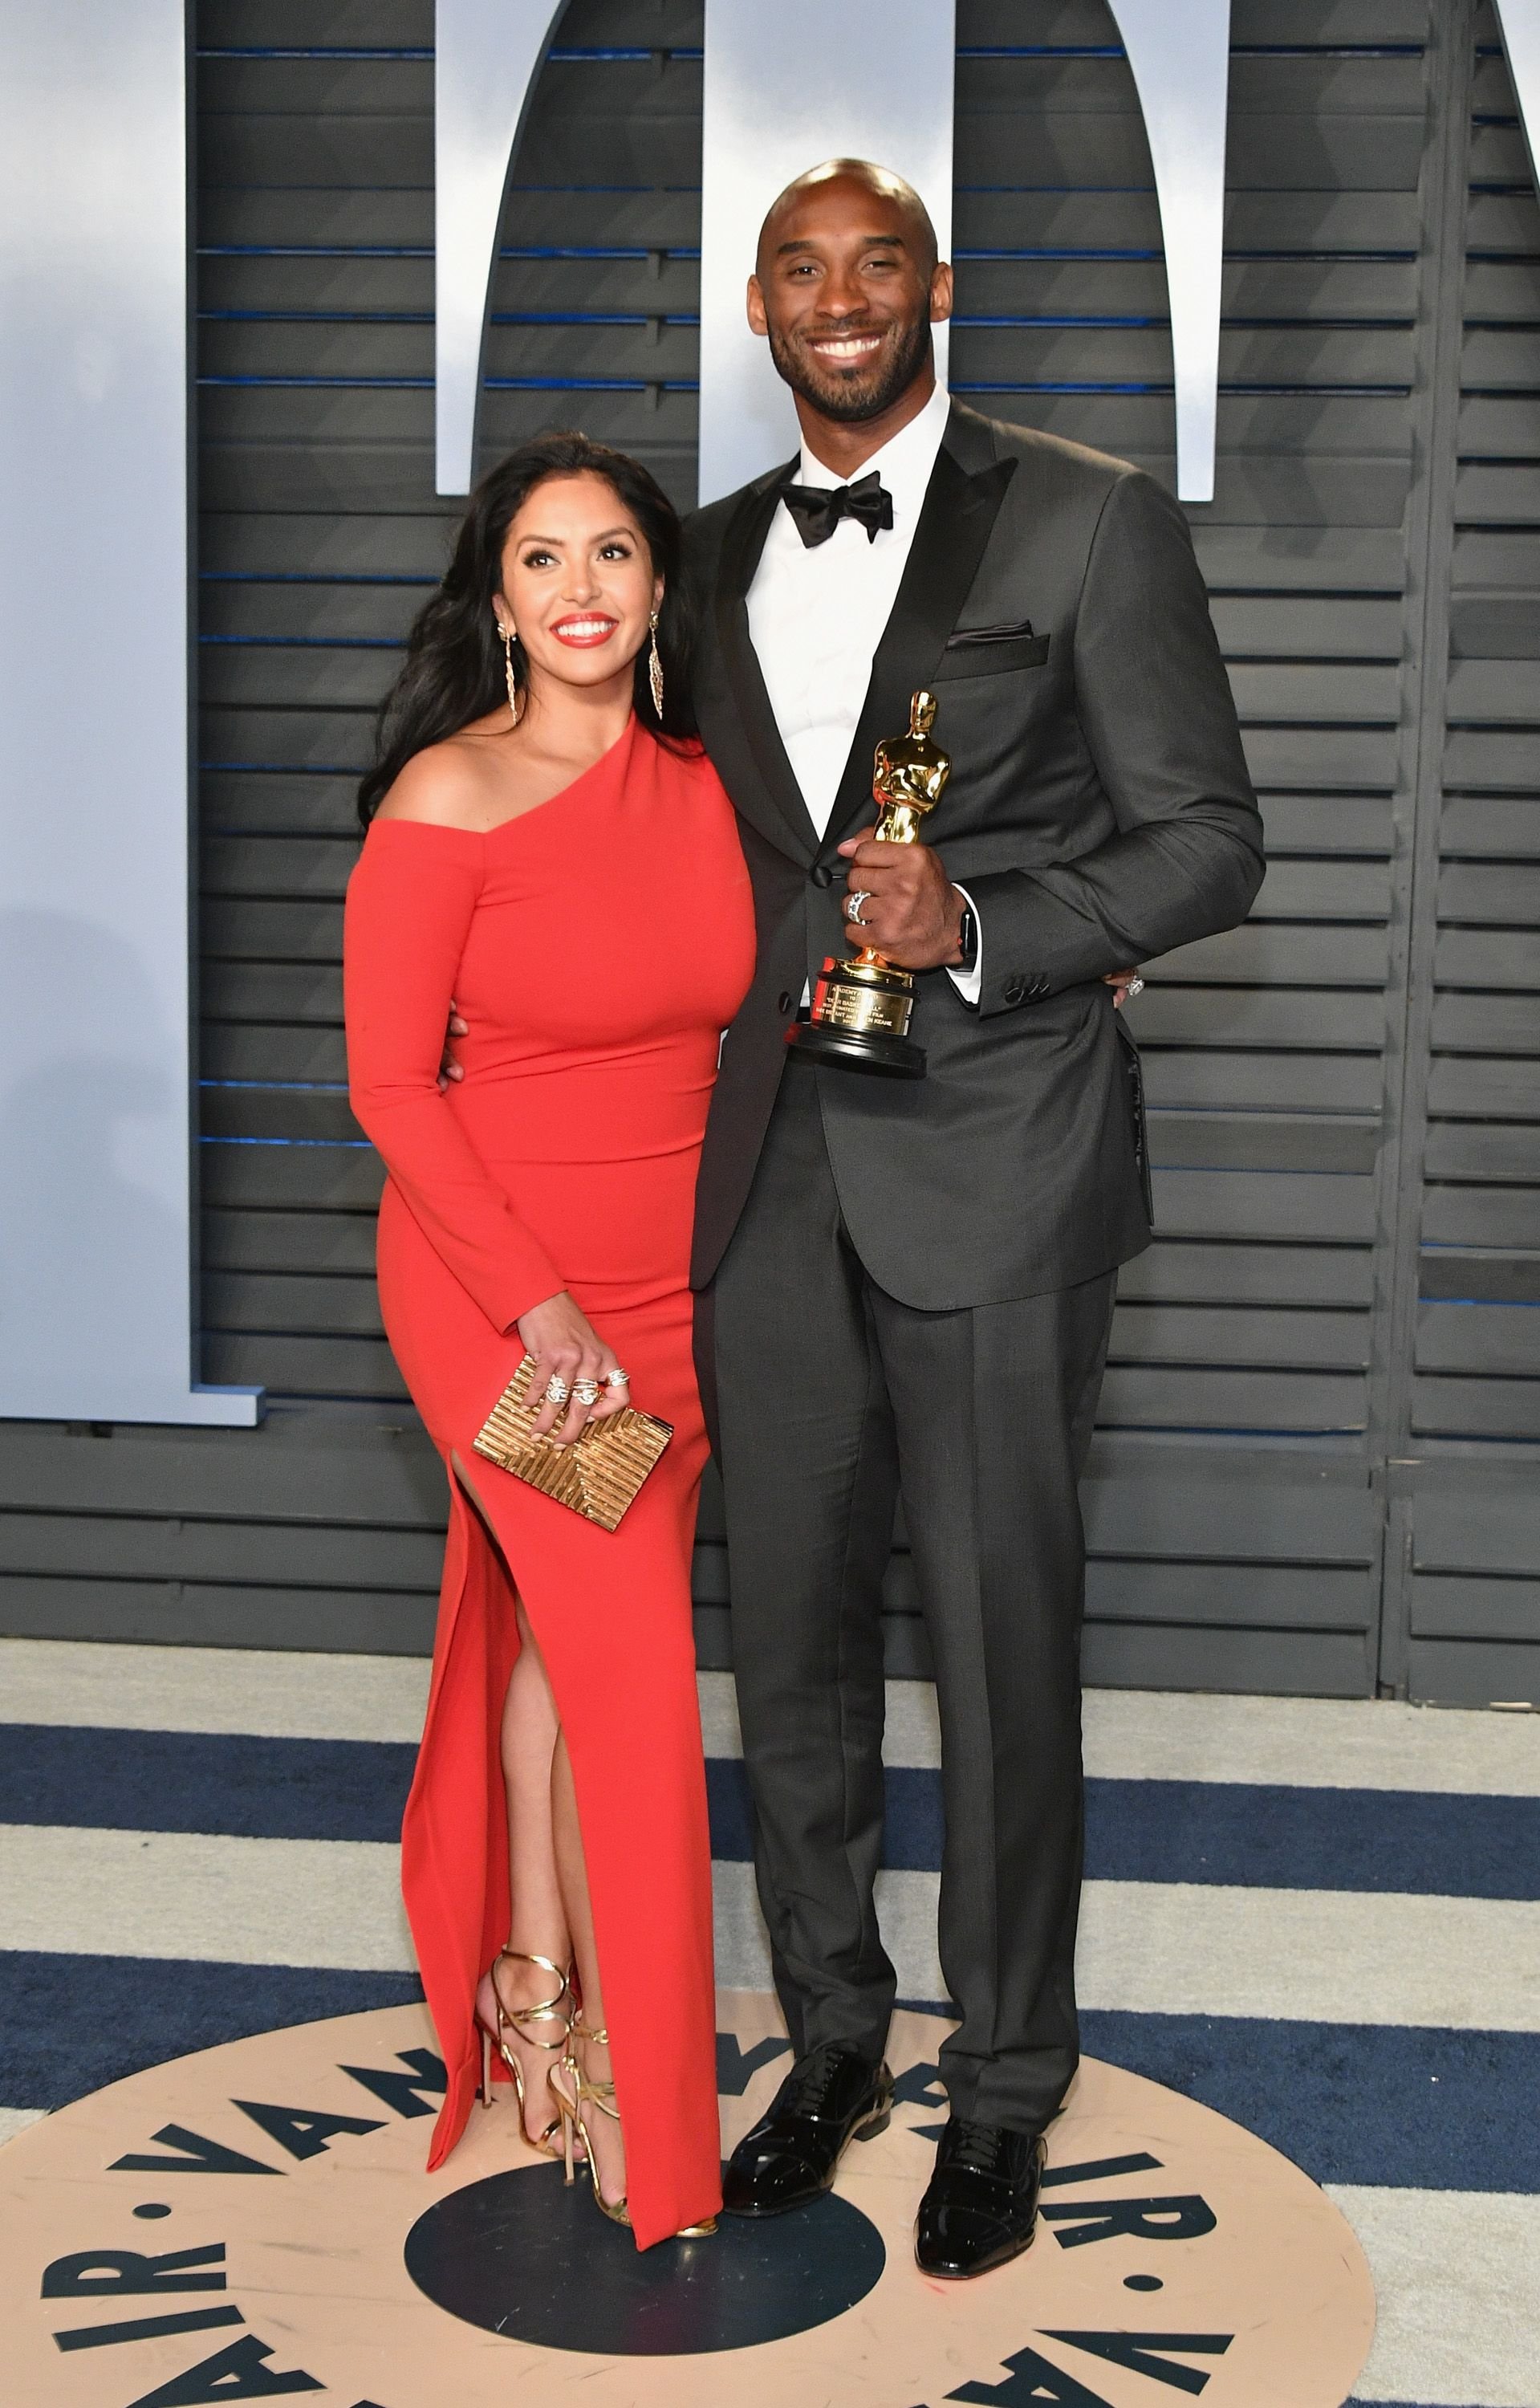 Vanessa Bryant and Kobe Bryant at the 2018 Vanity Fair Oscar Party hosted by Radhika Jones at Wallis Annenberg Center for the Performing Arts on March 4, 2018 | Photo: Getty Images